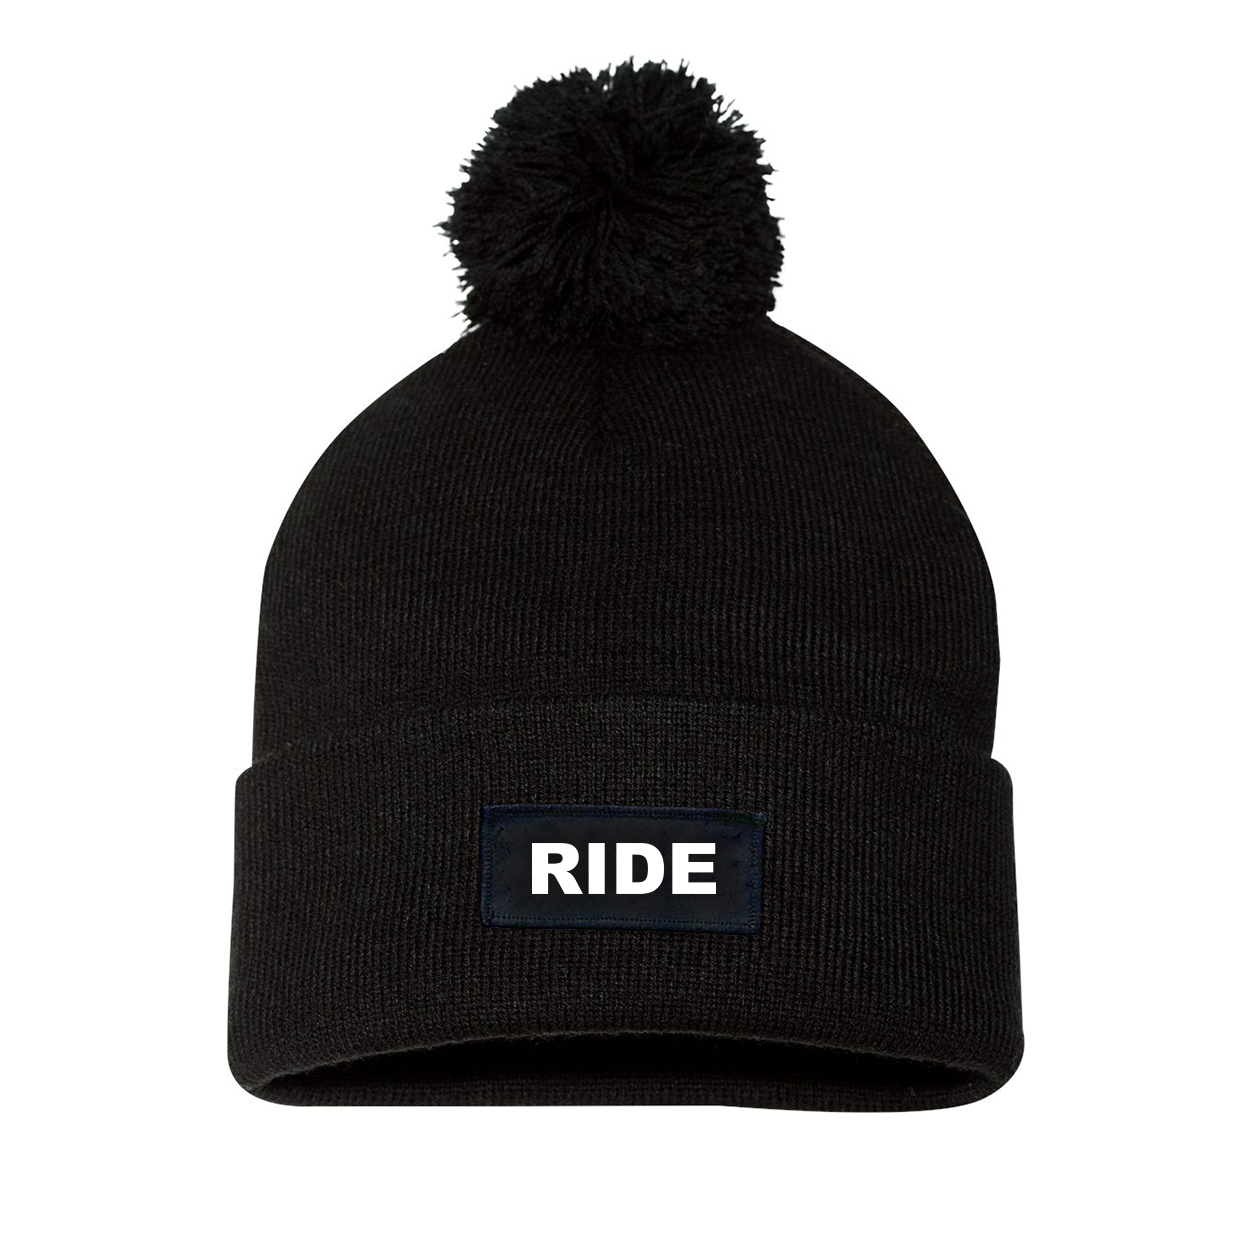 Ride Brand Logo Night Out Woven Patch Roll Up Pom Knit Beanie Black